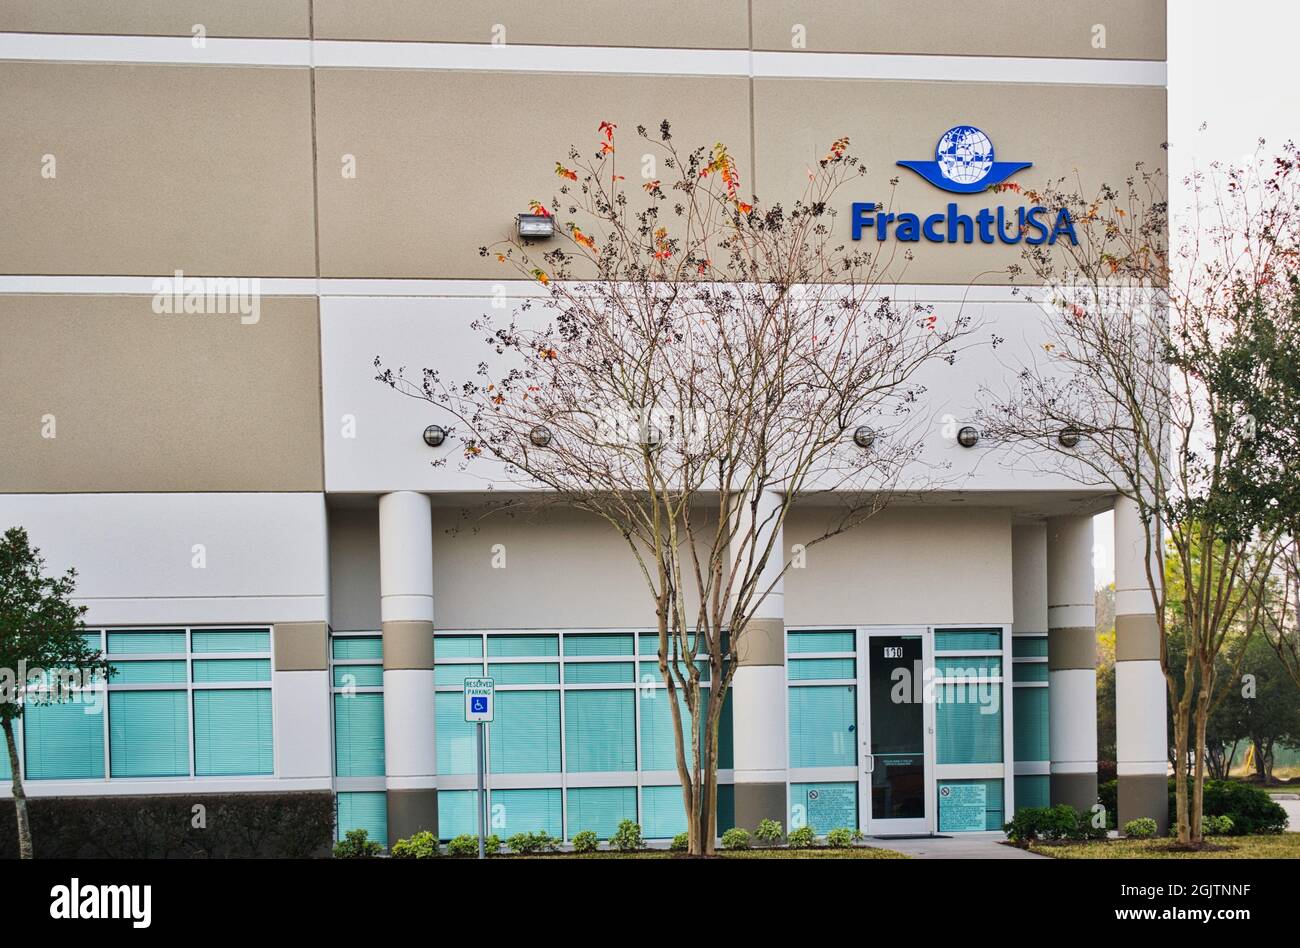 Houston, Texas USA 12-25-2019: Fracht USA office exterior in Houston, TX. Logistics and transportation company founded in 1955. Stock Photo